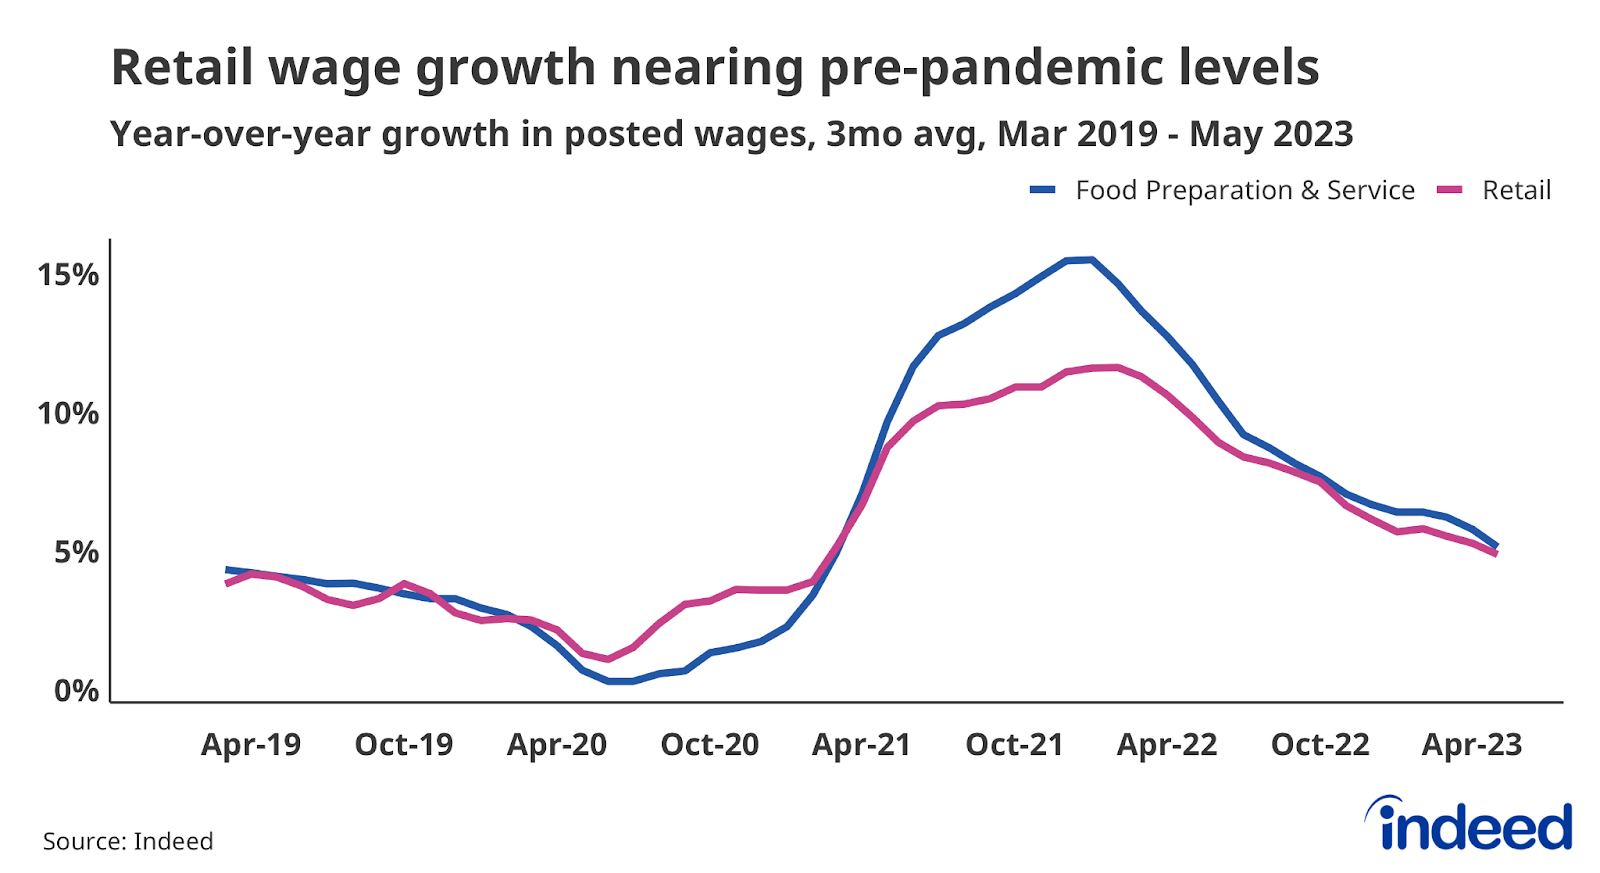 Line chart showing the year-over-year percent change in posted wages for the Retail and Food Preparation & Service categories, through May 2023. Wage growth in both categories has fallen sharply in the past year.
